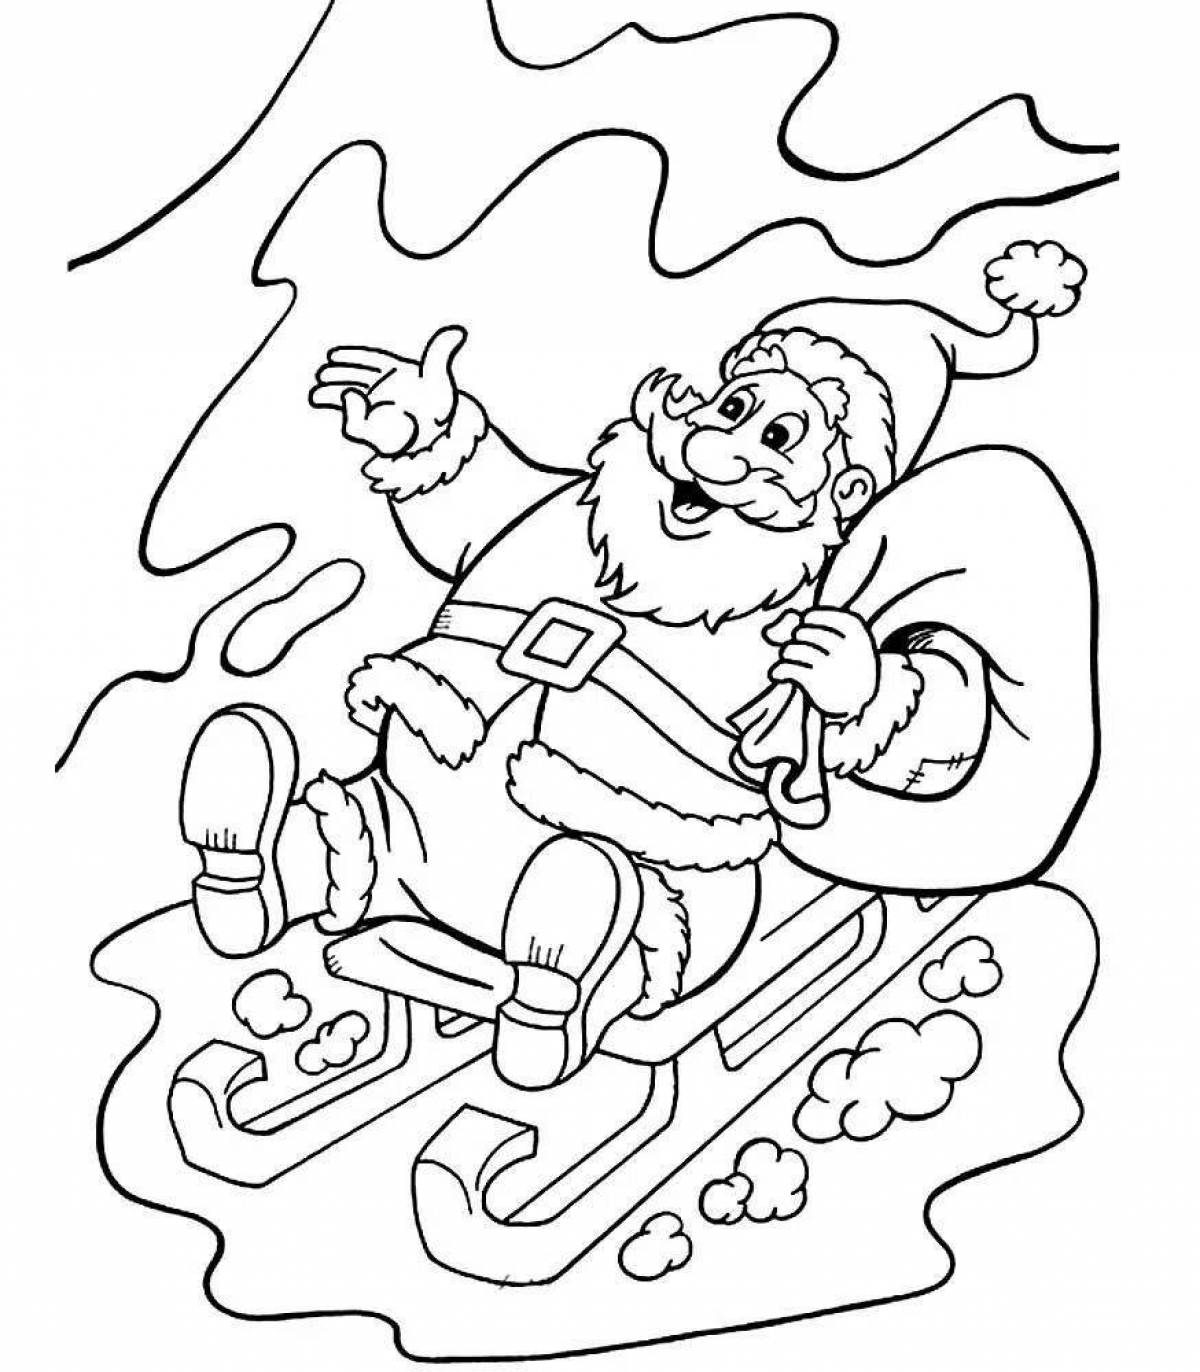 Coloring page dazzling santa claus on a sleigh